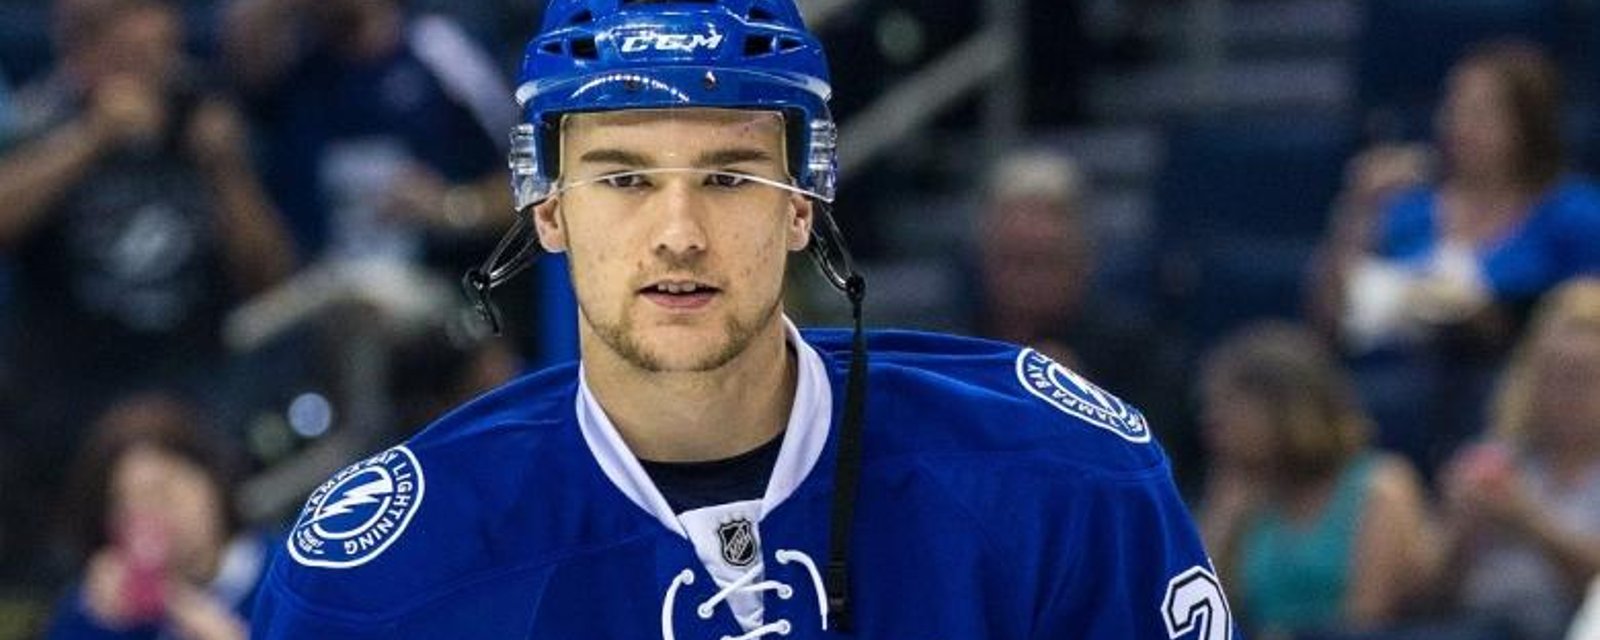 Lightning call up Drouin, could have significant impact on trade value.